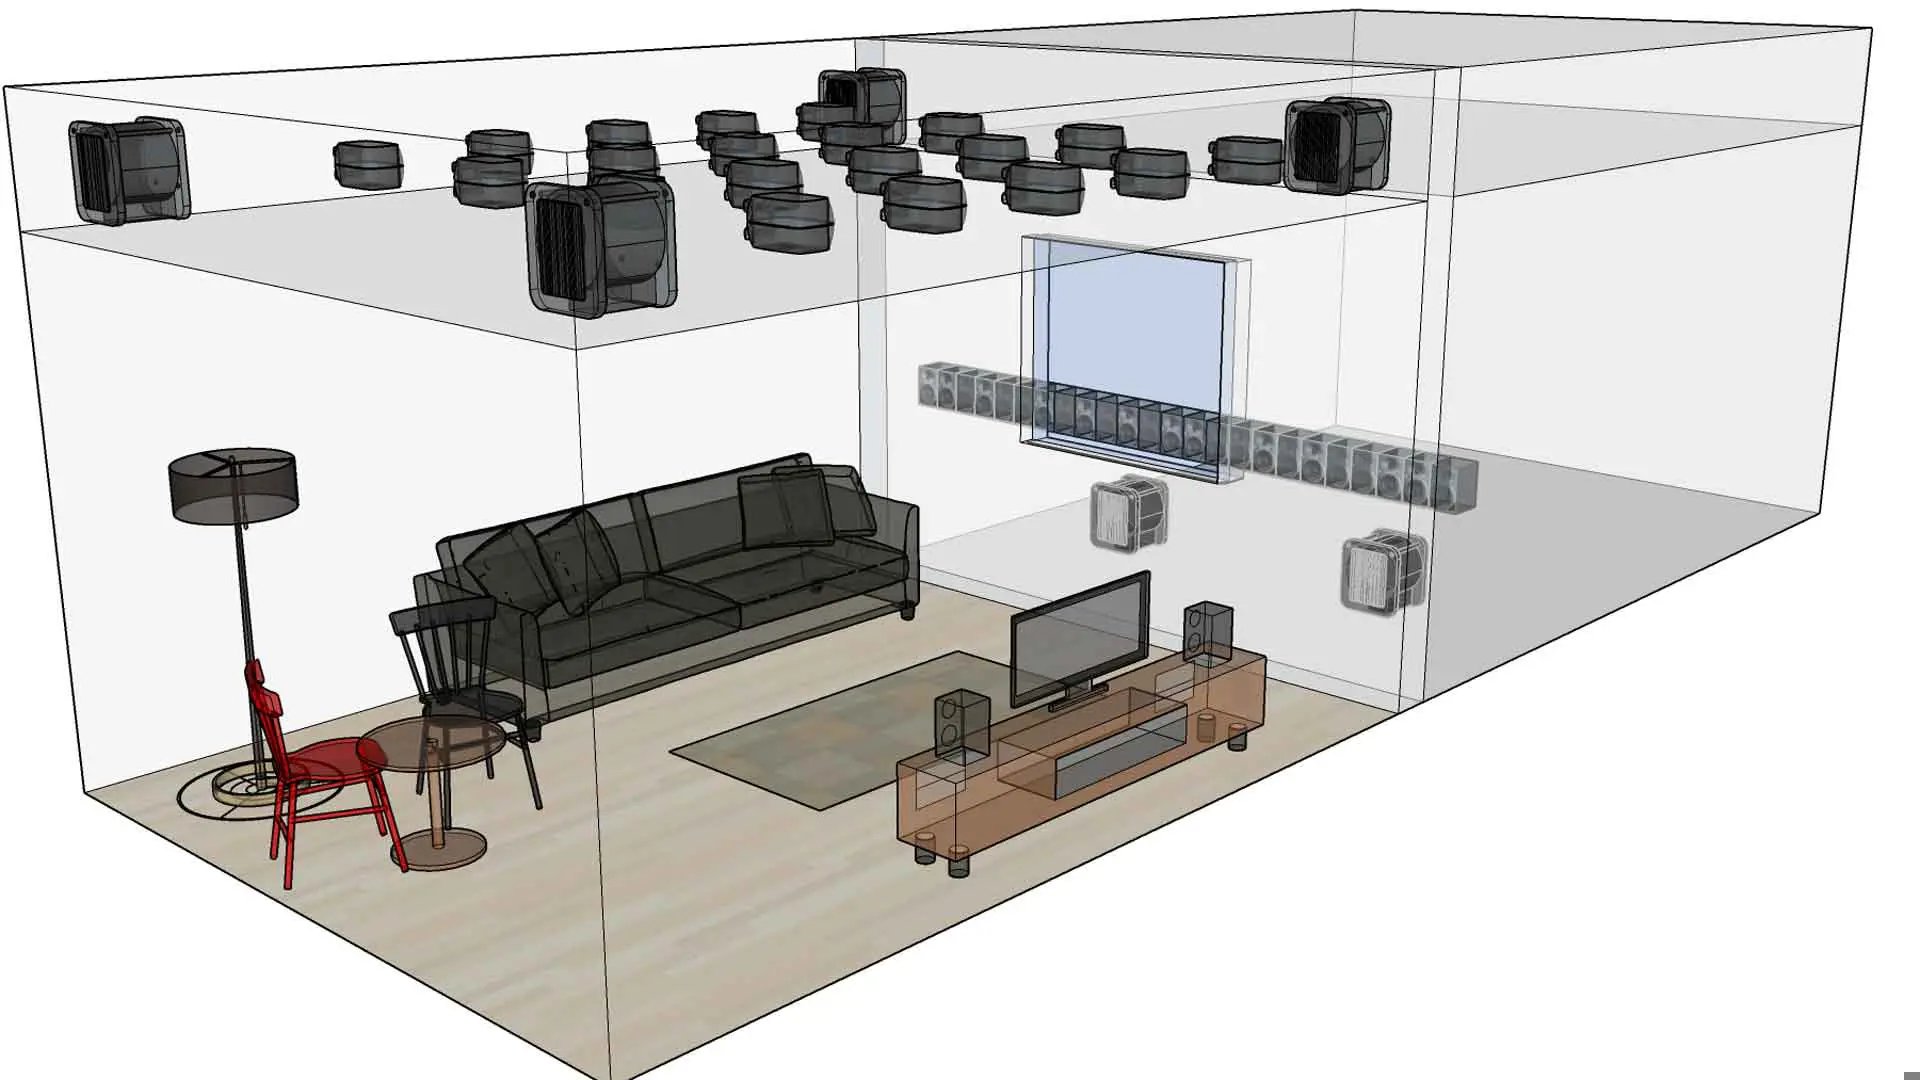 Model of the acoustics lab with hidden loudspeakers